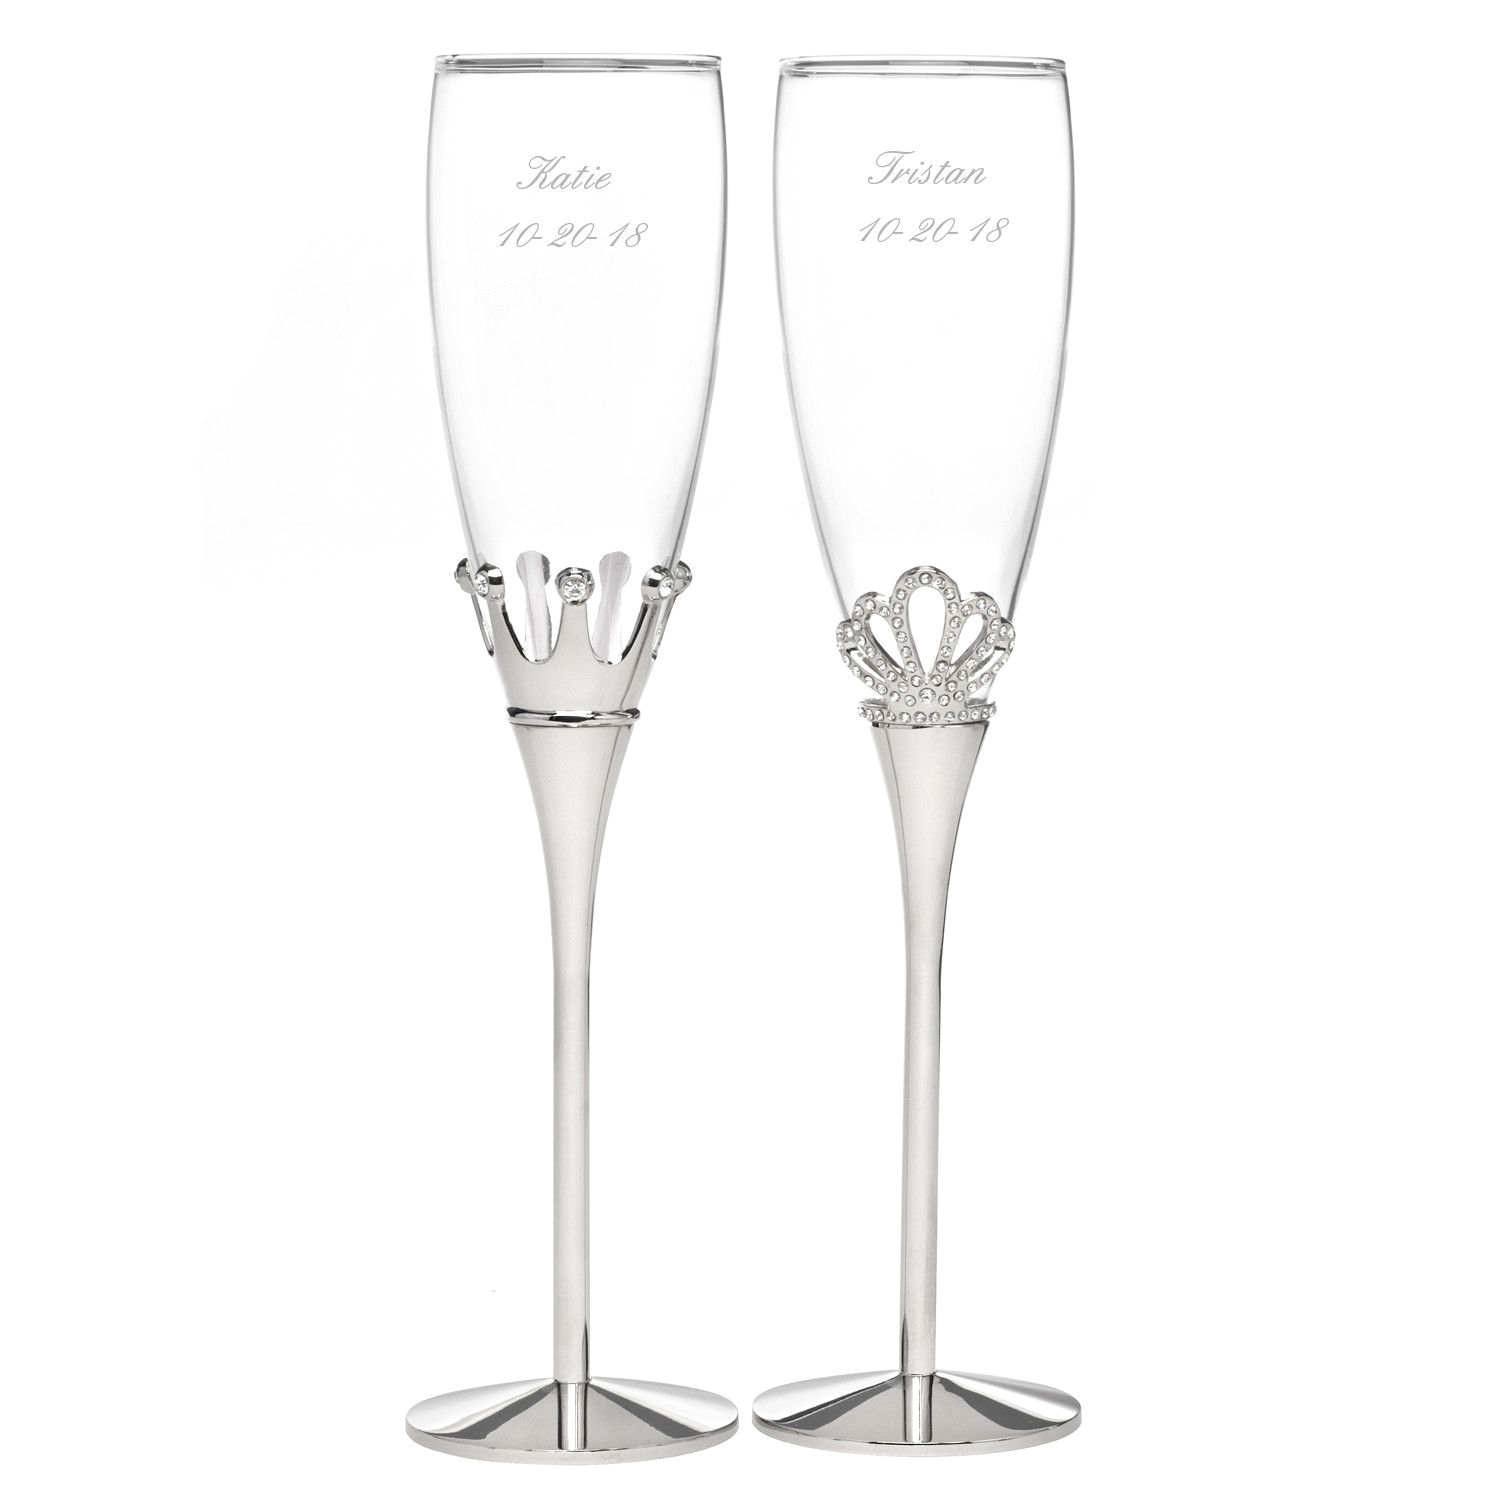 How to Decorate Plastic Champagne Glasses King and Queen Rhinestone Flute Glass Set Wedding Champagne